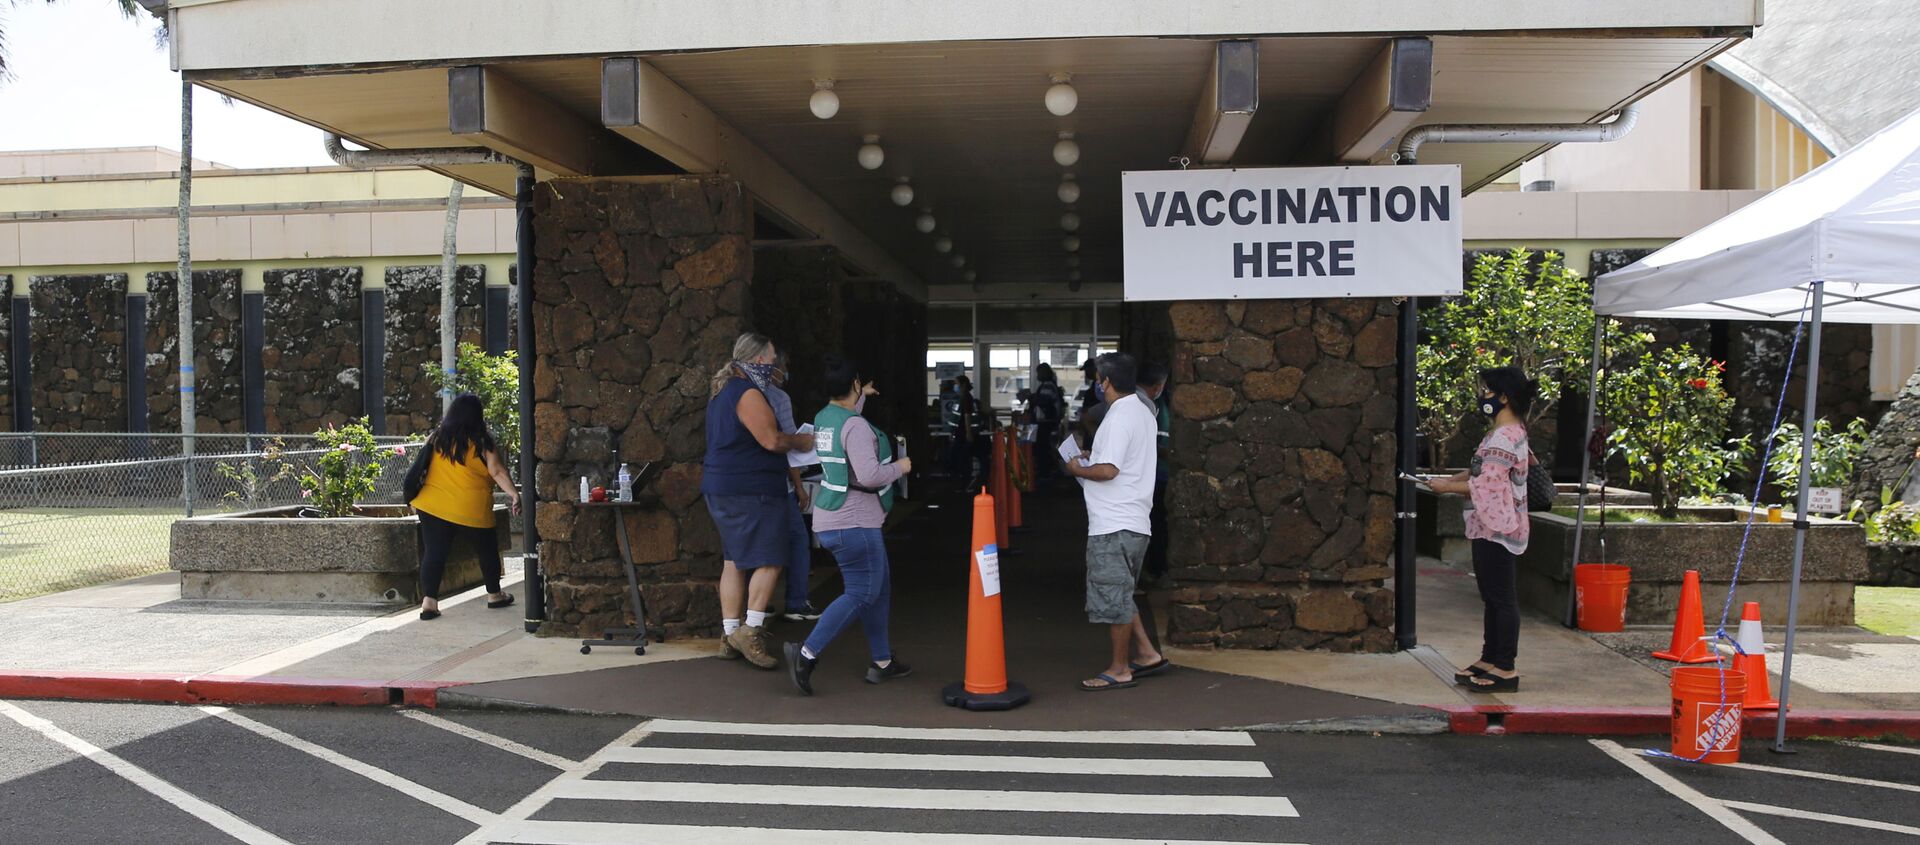 People line up to get COVID-19 vaccinations in Lihue, Hawaii, Wednesday, March 3, 2021. - Sputnik International, 1920, 13.04.2021